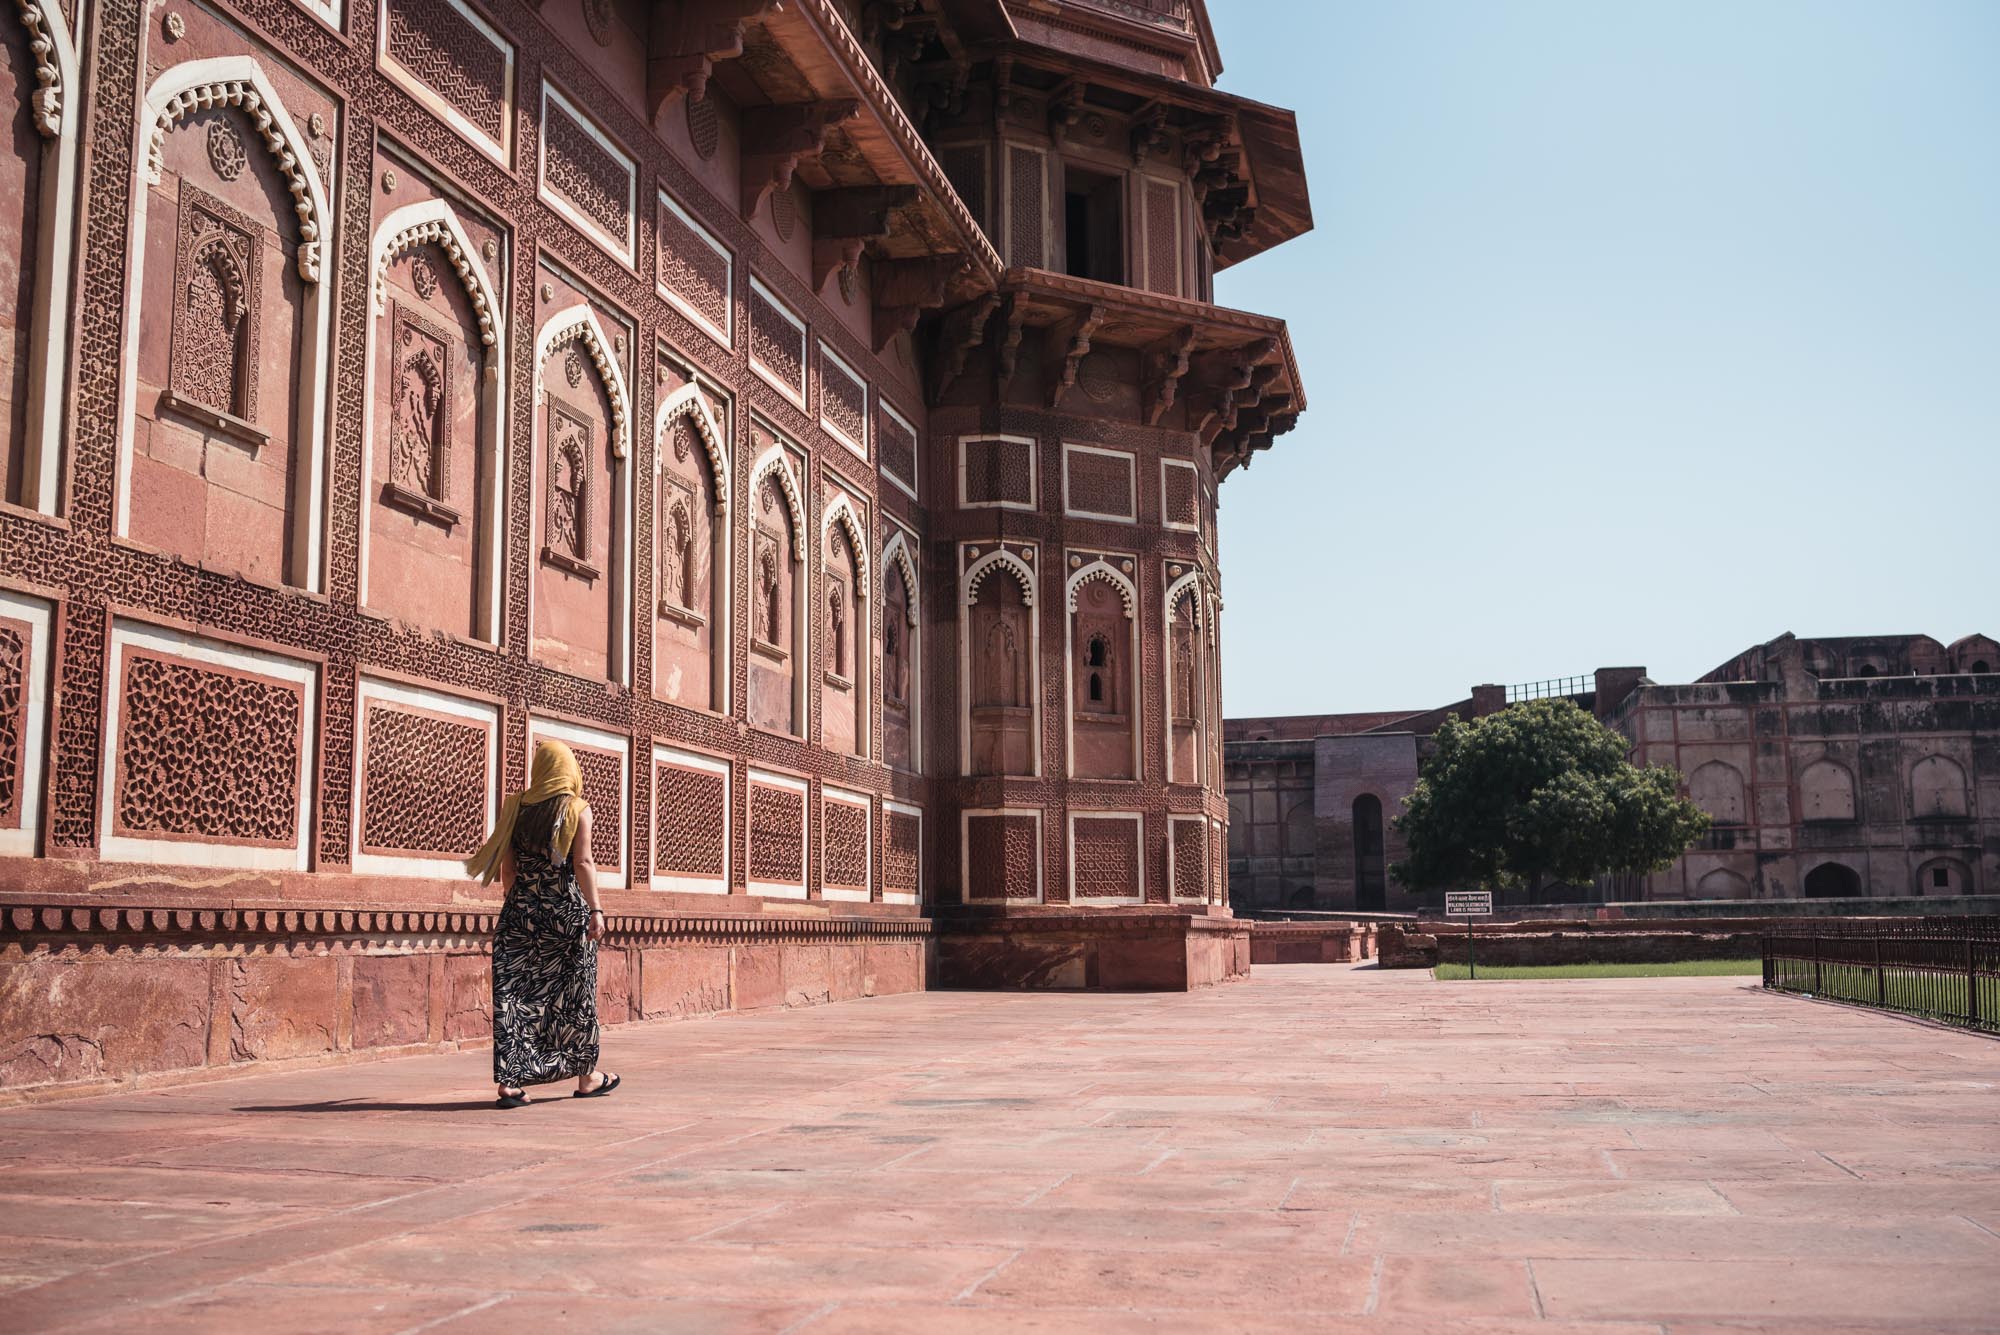 Walking at the Agra Fort